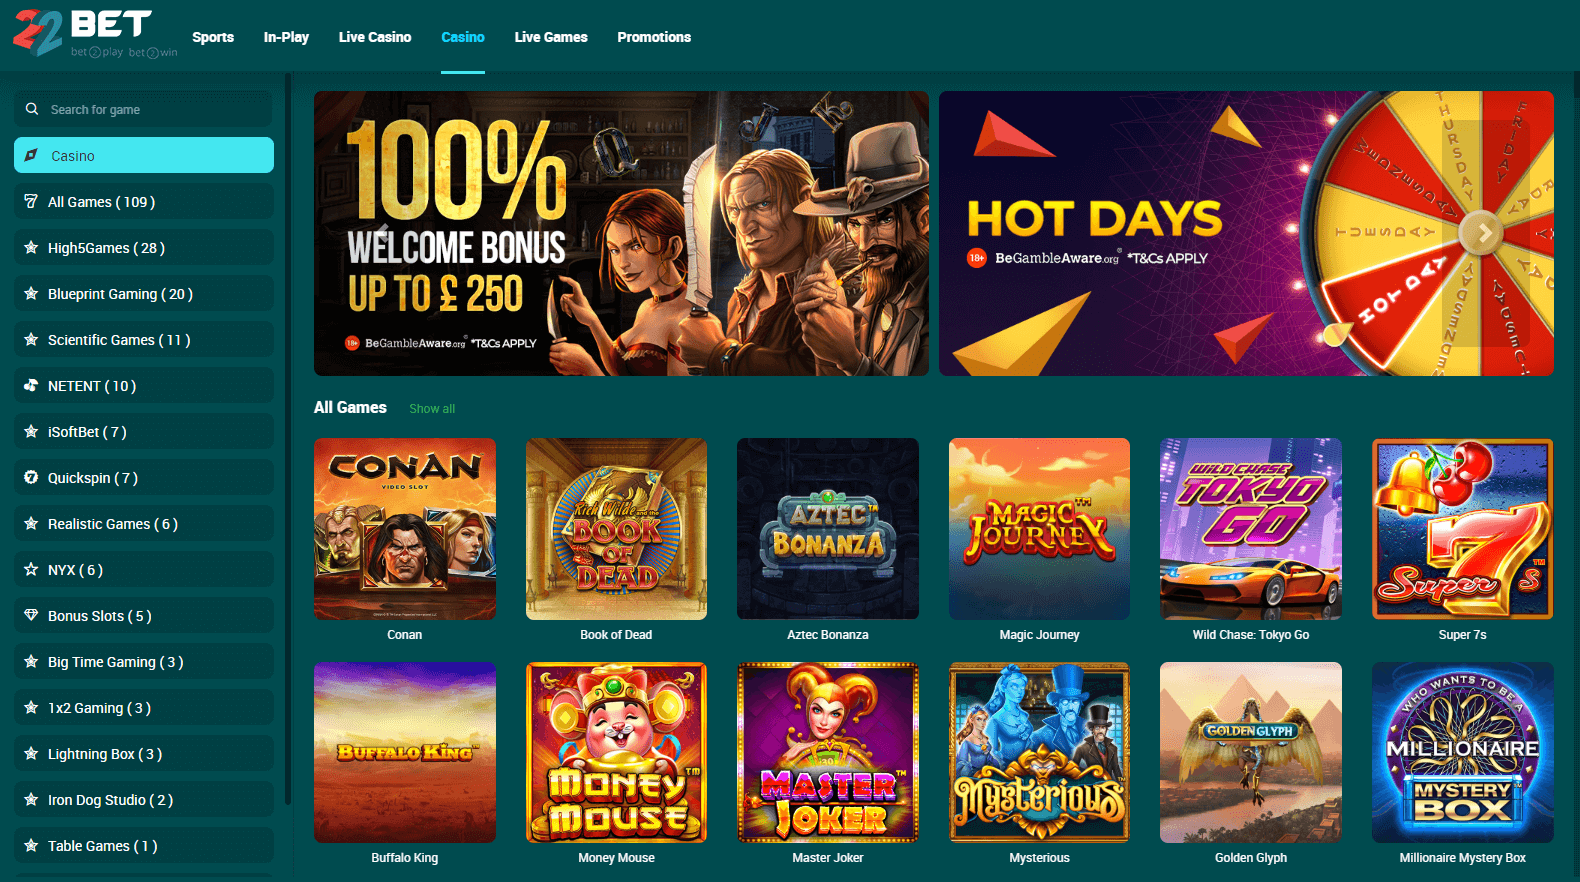 The 22Bet casino features a complete portfolio of interactive games, with a strong focus on slot machines.